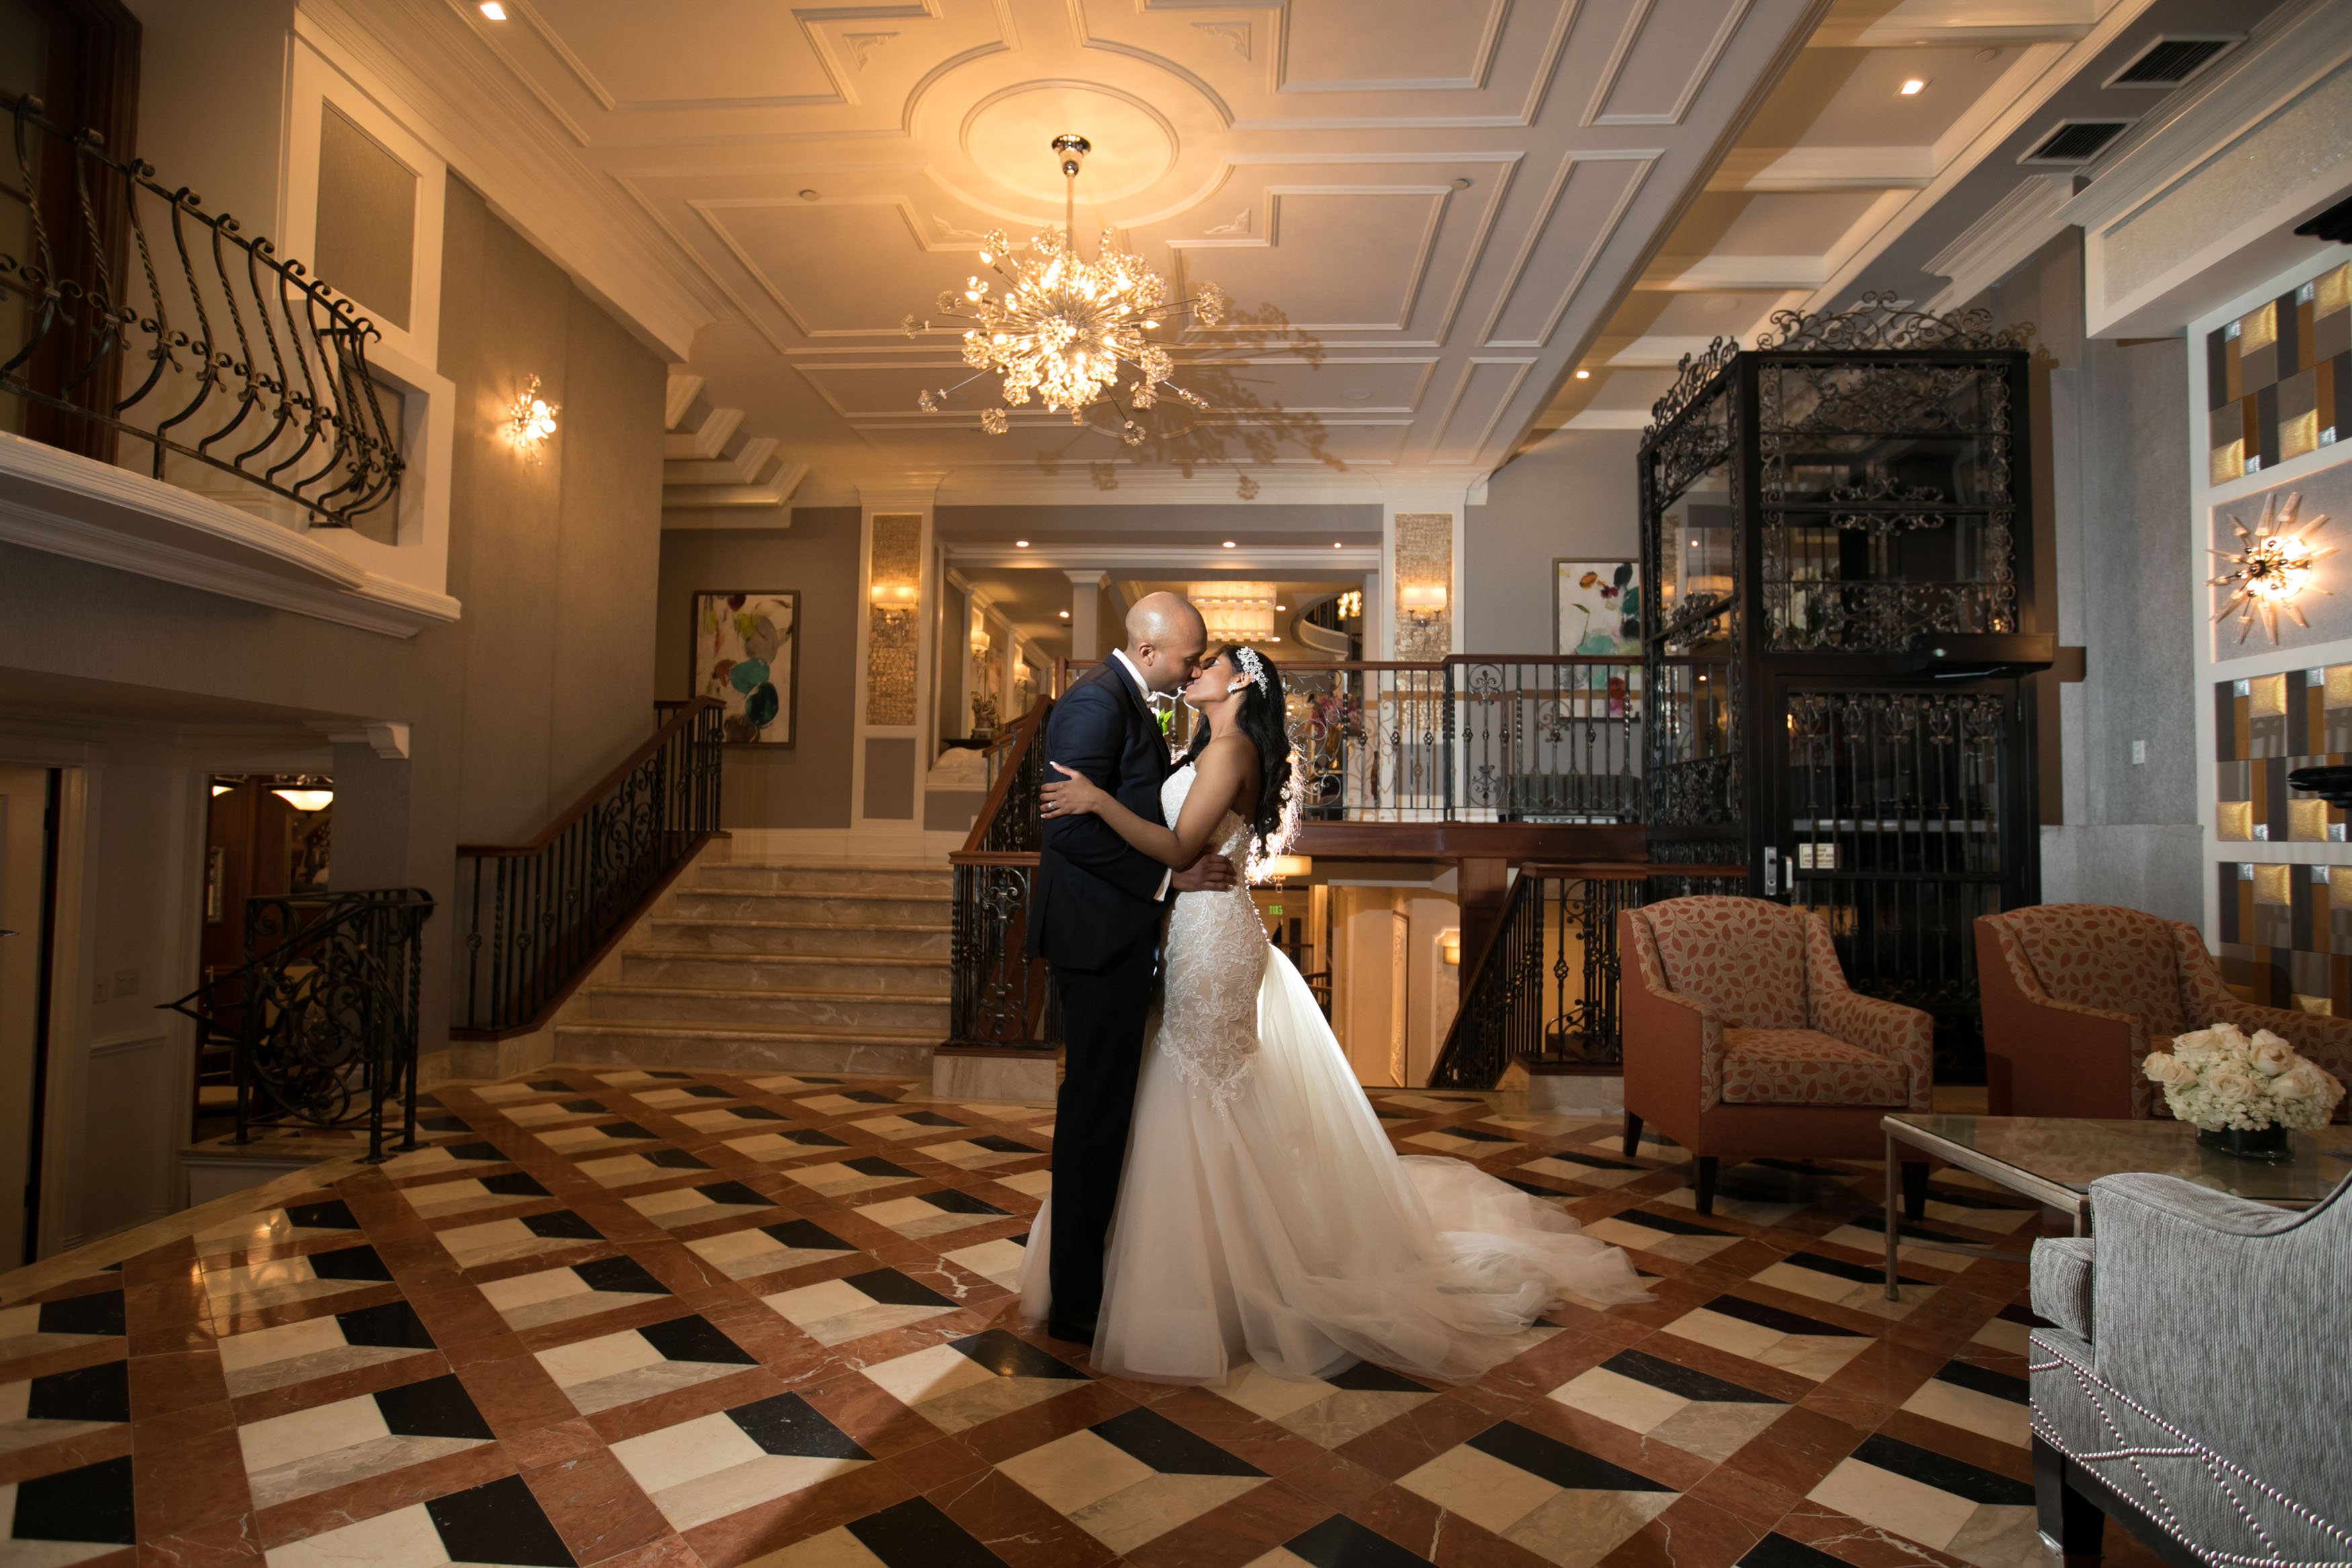 Jericho Terrace - Lobby Pictures - Bride and Groom Kissing